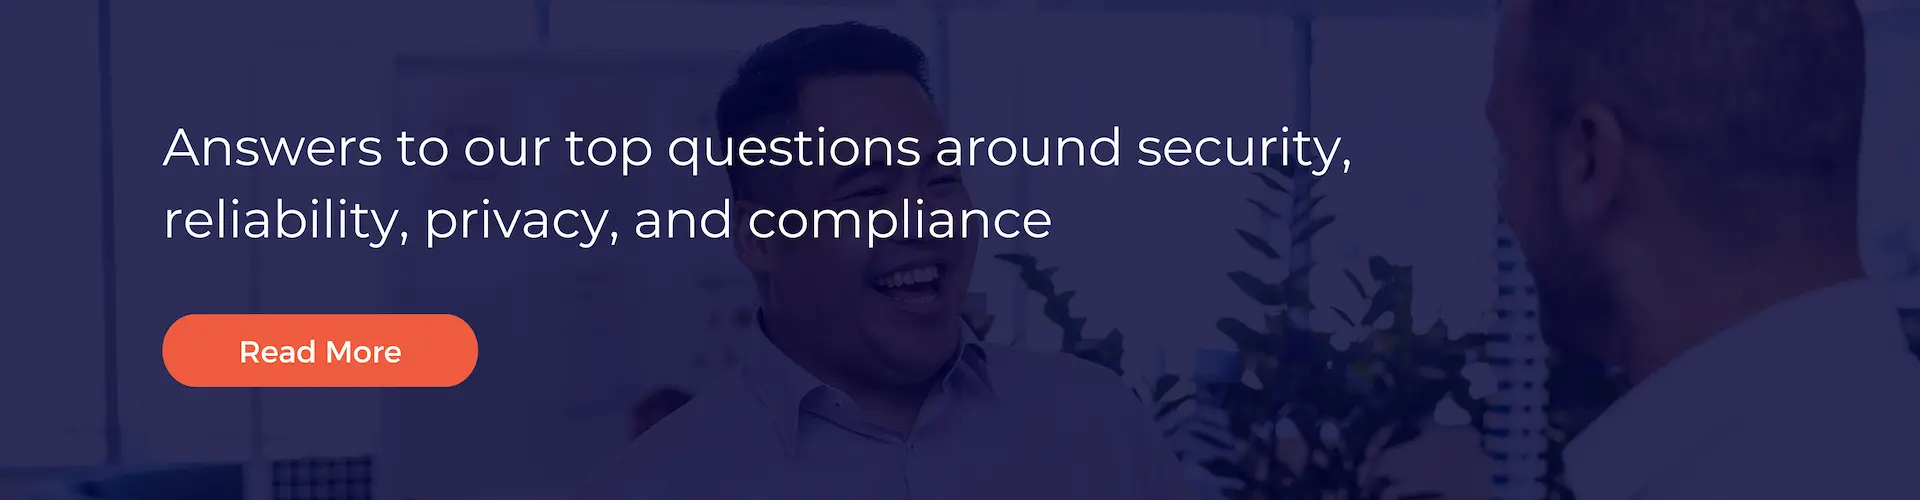 Read more to know the answers to our top questions around security, reliability, privacy, and compliance. This CTA will redirect you to the Kinatico's Data Safety and Trust page.